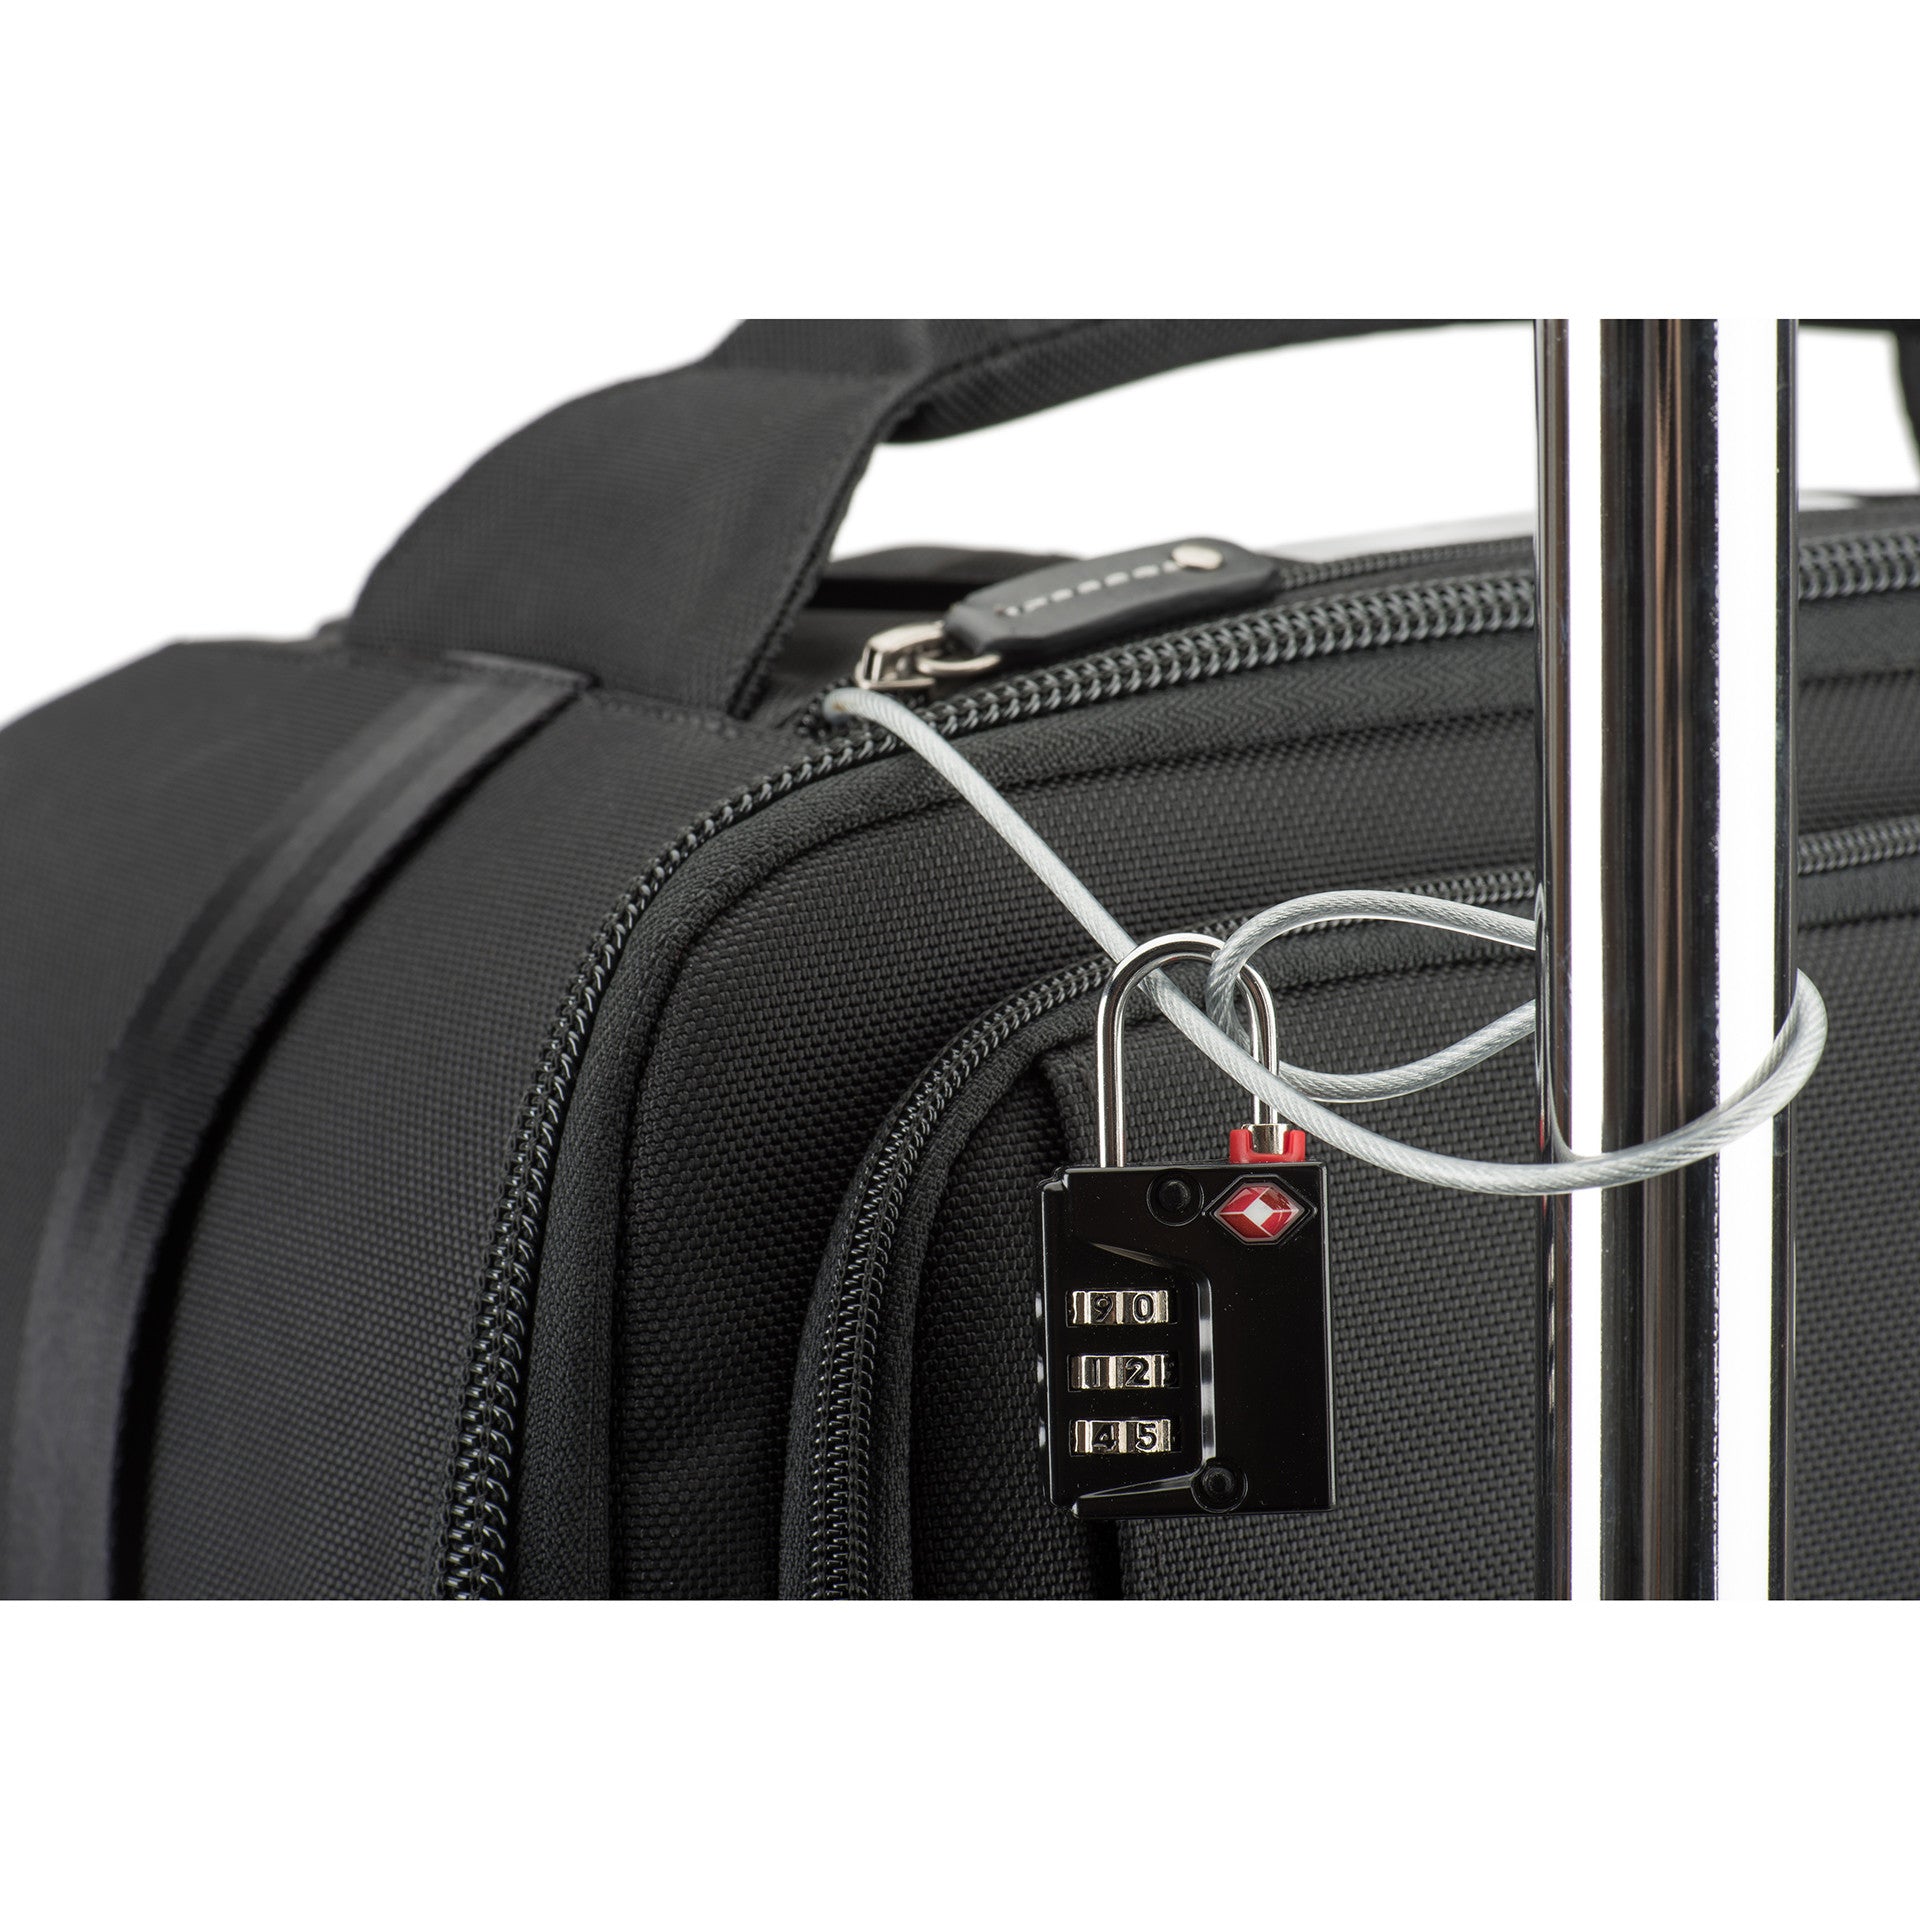 High-strength coated cable and combination lock for the laptop compartment and securing your bag to an immovable object